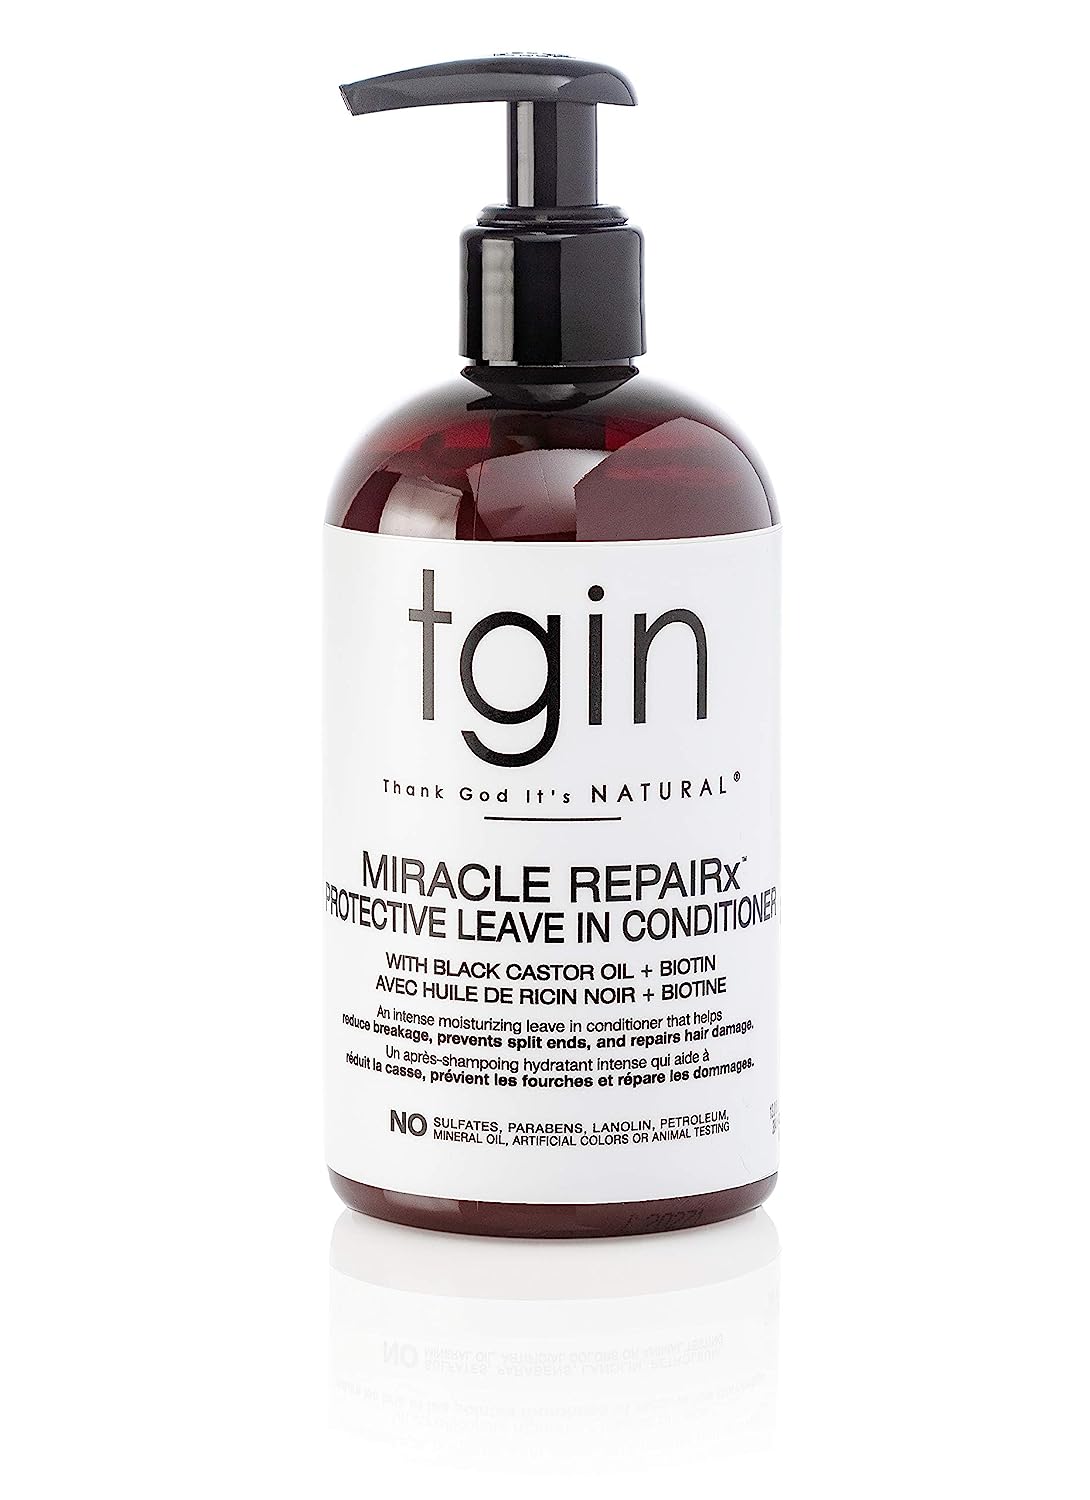 tgin Miracle RepaiRx Protective Leave In Conditioner [...]